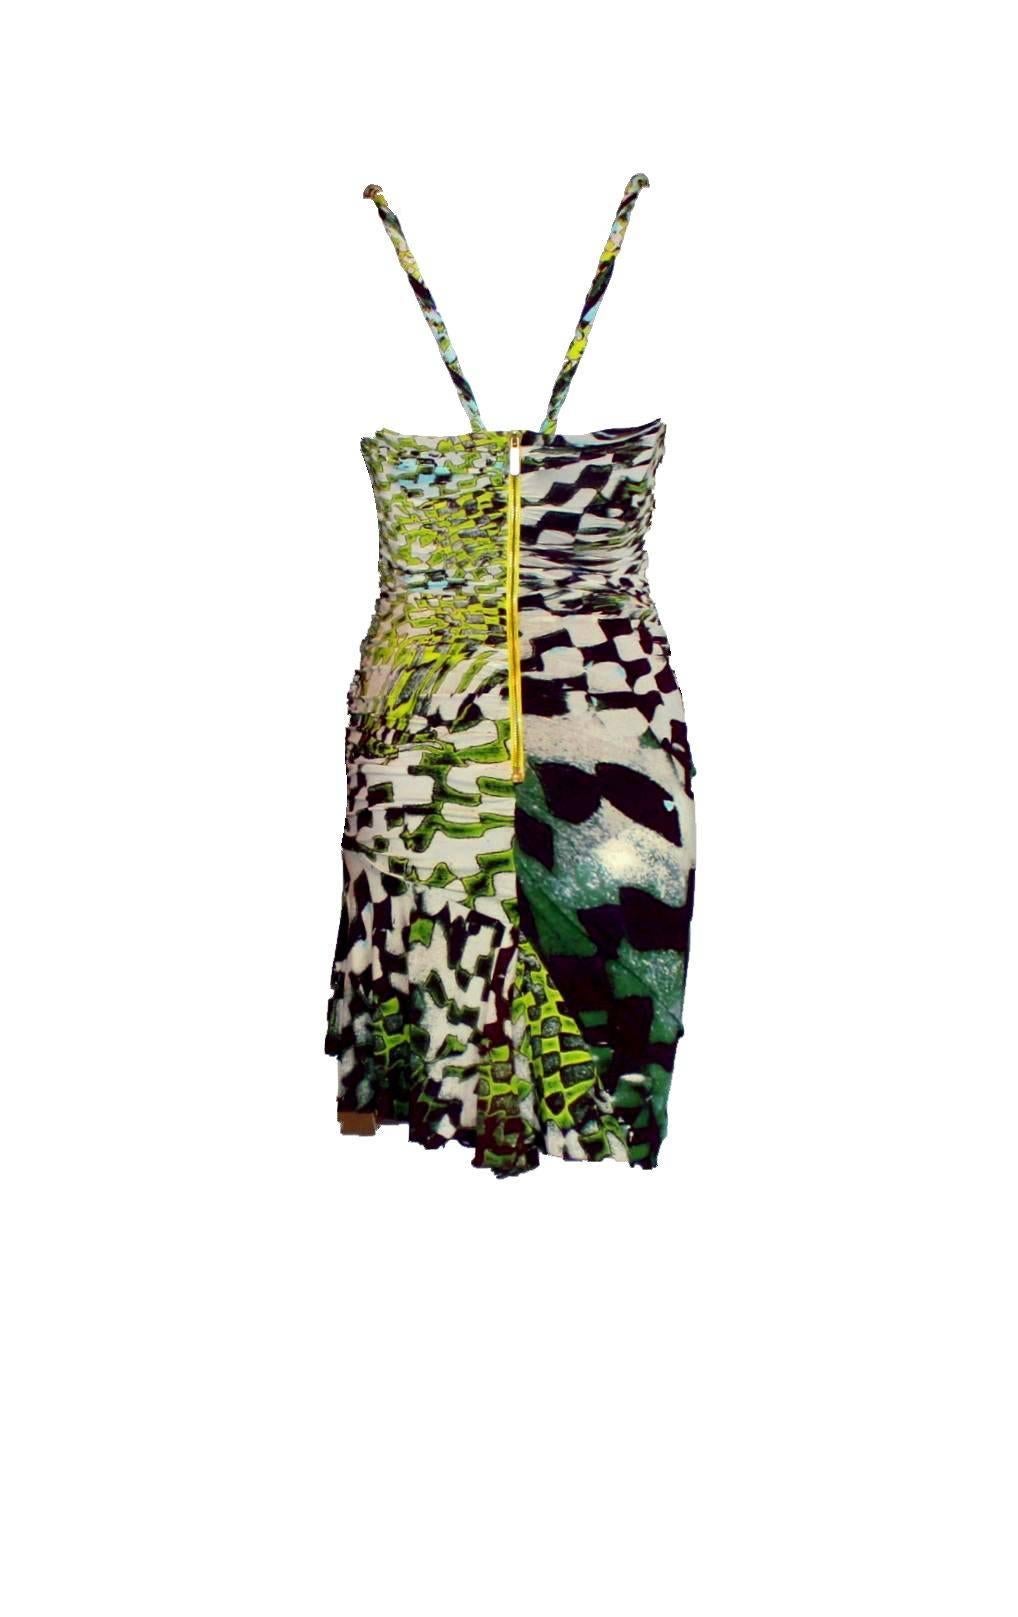 Head-turning corset dress by Roberto Cavalli
In the famous animal fantasy print
With Roberto Cavalli signature all over
Corset bodice inside for a perfect and firm fit
Ruched details 
Closes with decorative zipper in back
Made in Italy
Dry Clean